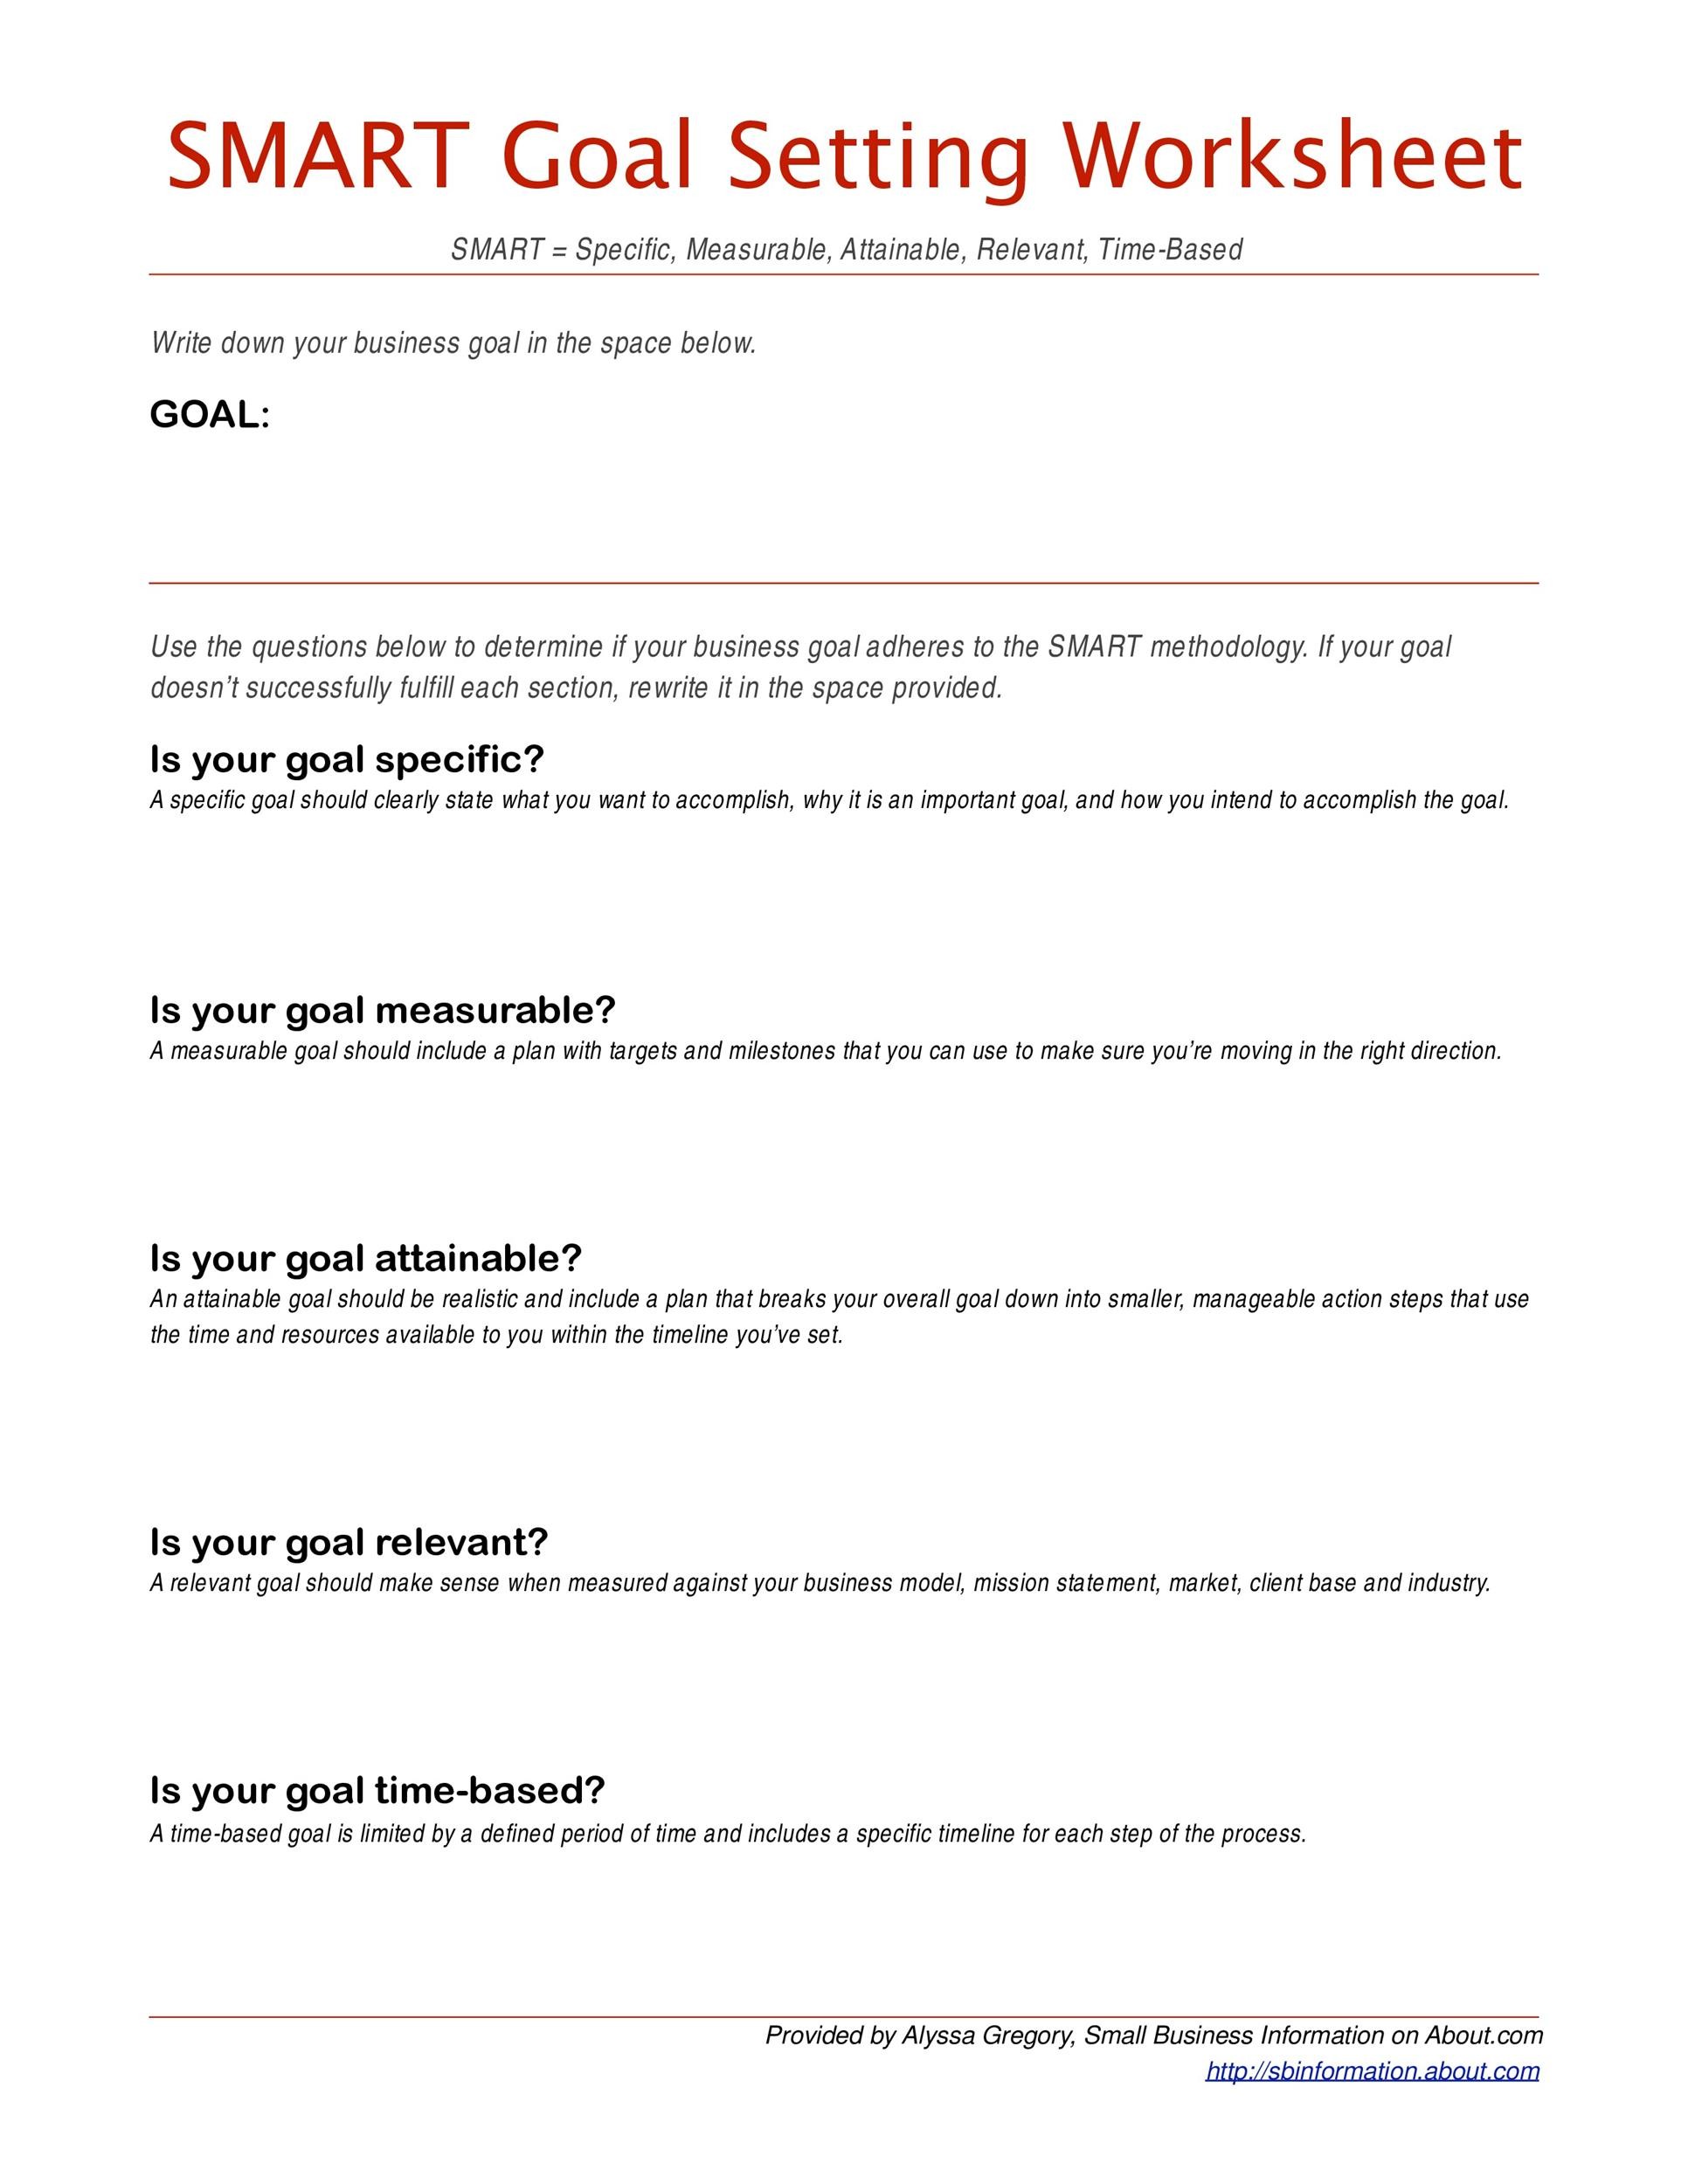 How to write goals and objectives for a business plan